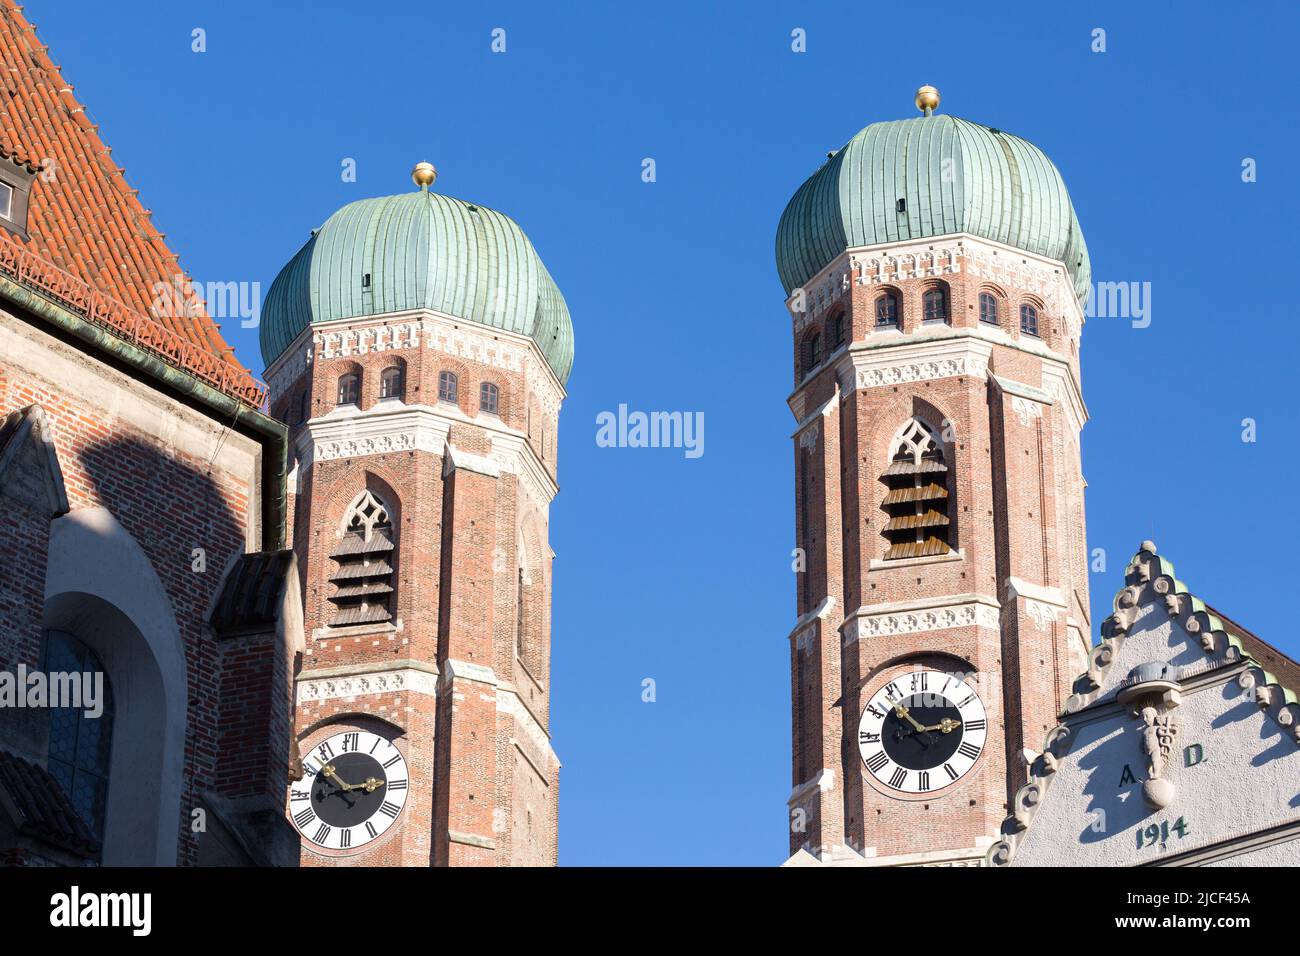 Munich, Germany - Jan 14, 2022: View on the two steeples of the Frauenkirche (Cathedral of our dear lady). Landmark of Munich. Stock Photo